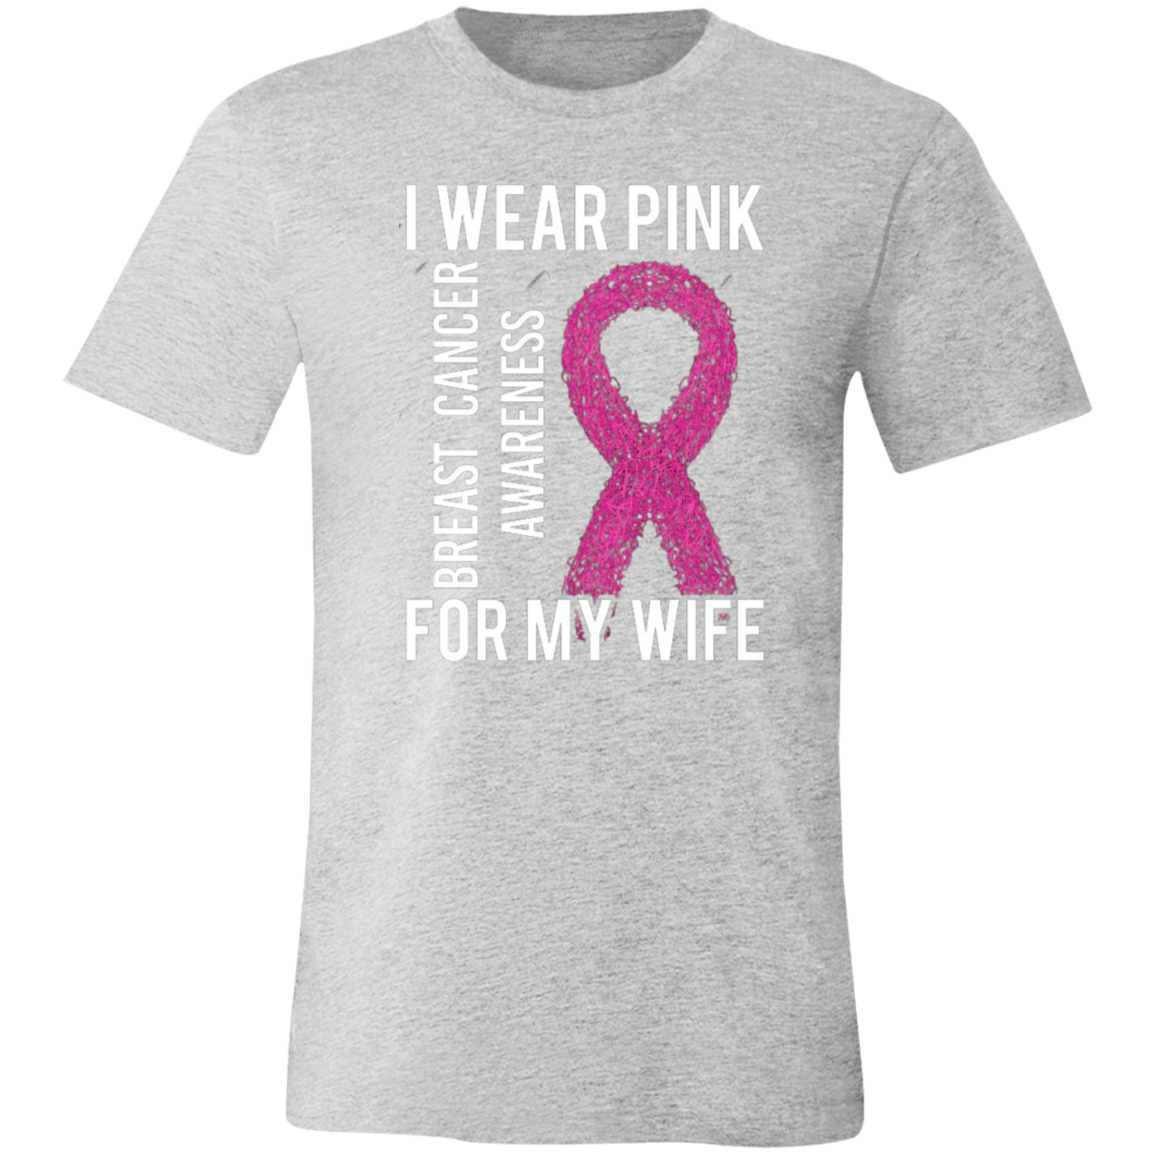 I Wear Pink For My Wife Unisex Jersey Short-Sleeve T-Shirt